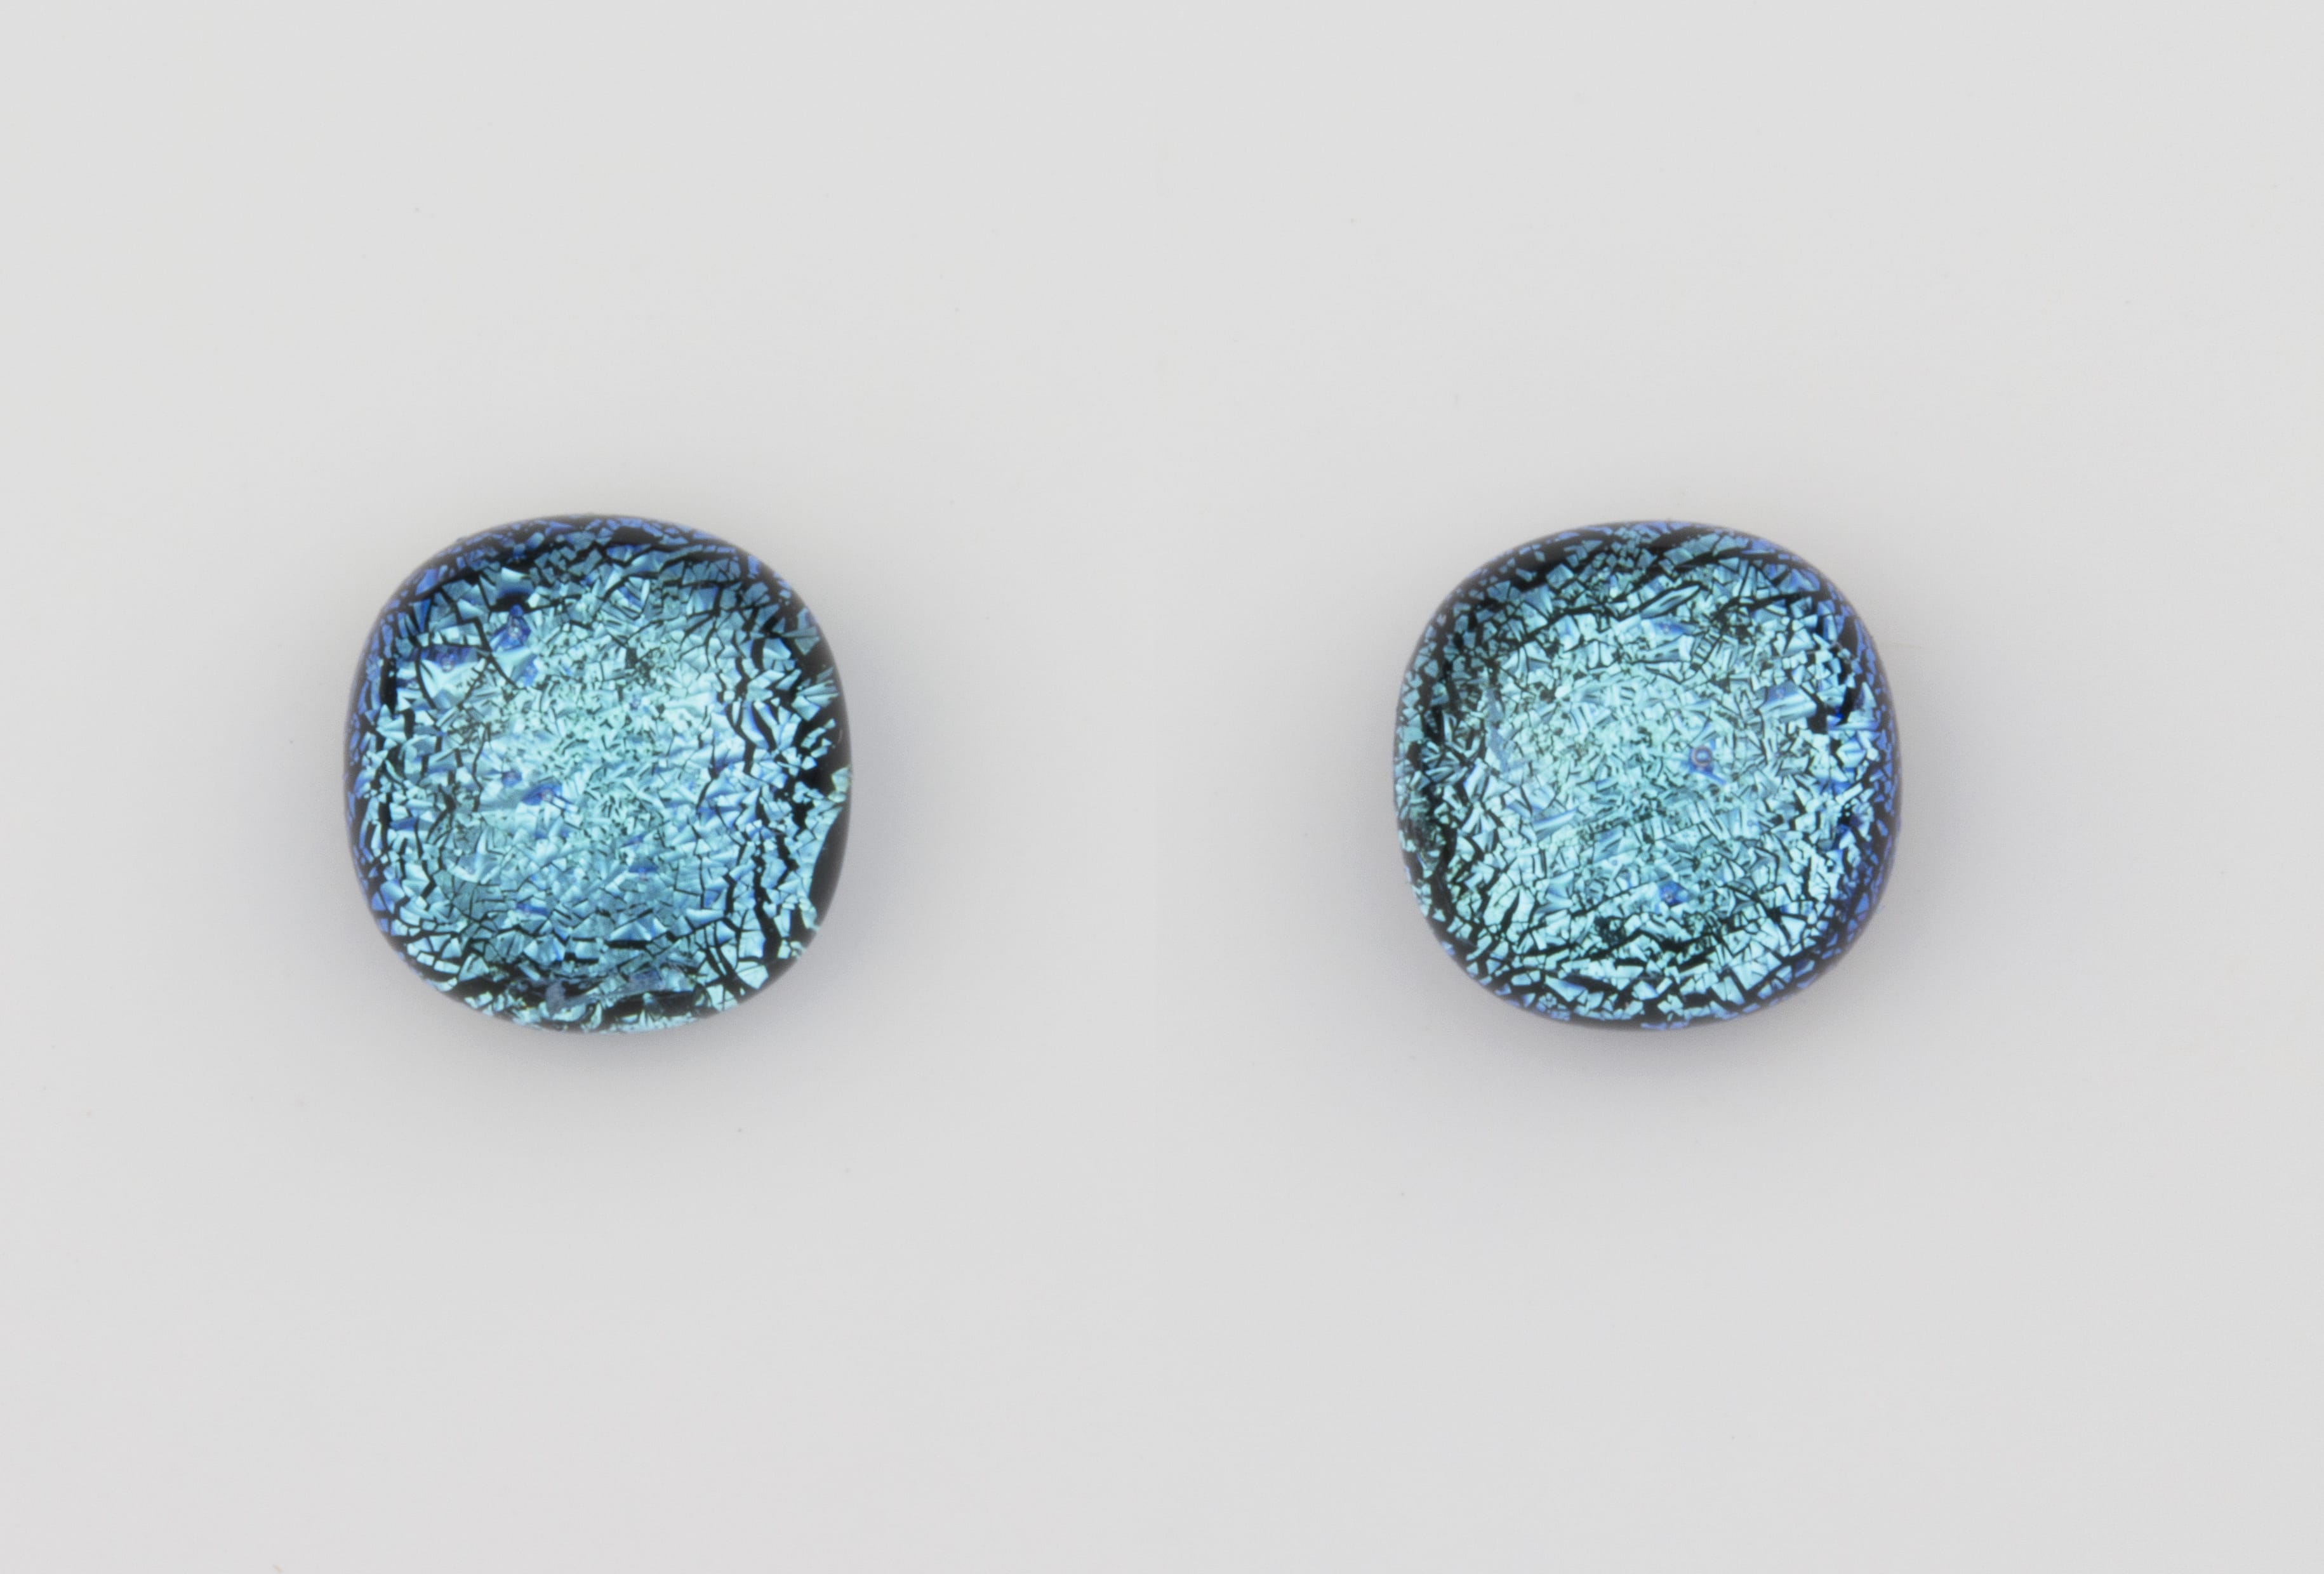 Dichroic glass jewellery uk, handmade stud earrings with pale blue dichroic glass, round, sterling glass 7-9mm, silver posts.